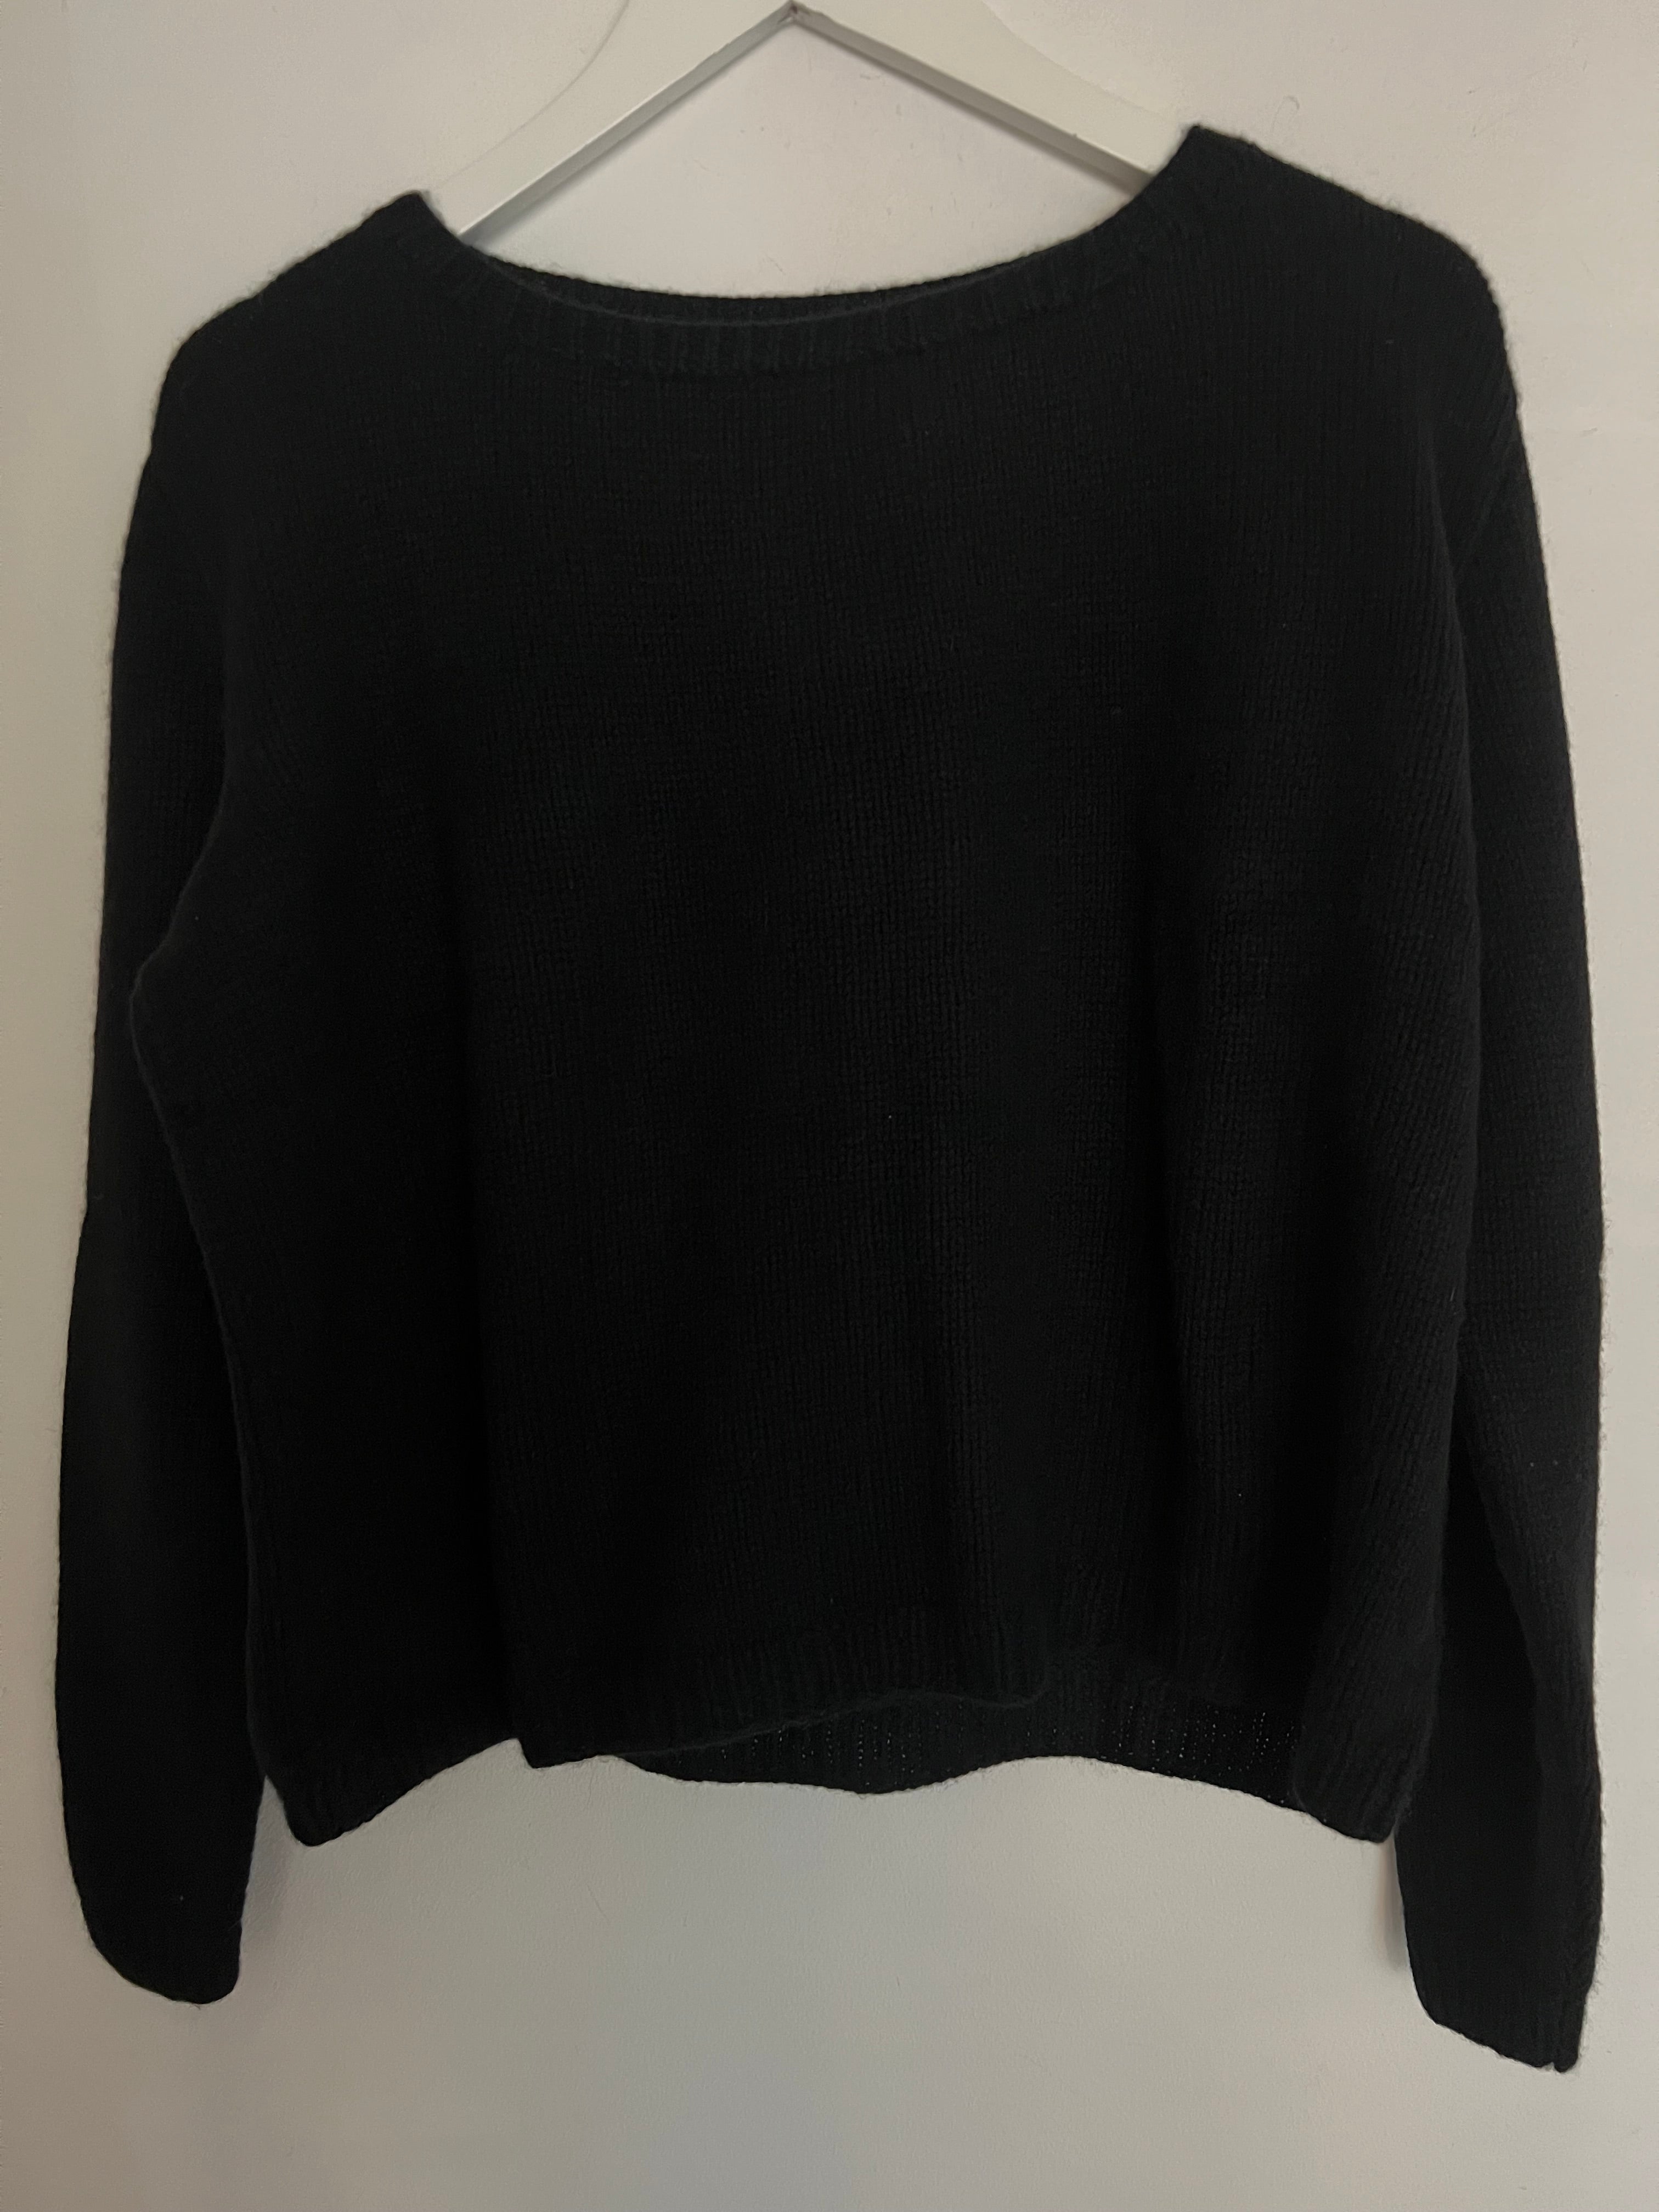 Hetre Alresford Hampshire Clothes Store English Weather Black Sophie Cashmere Sweater